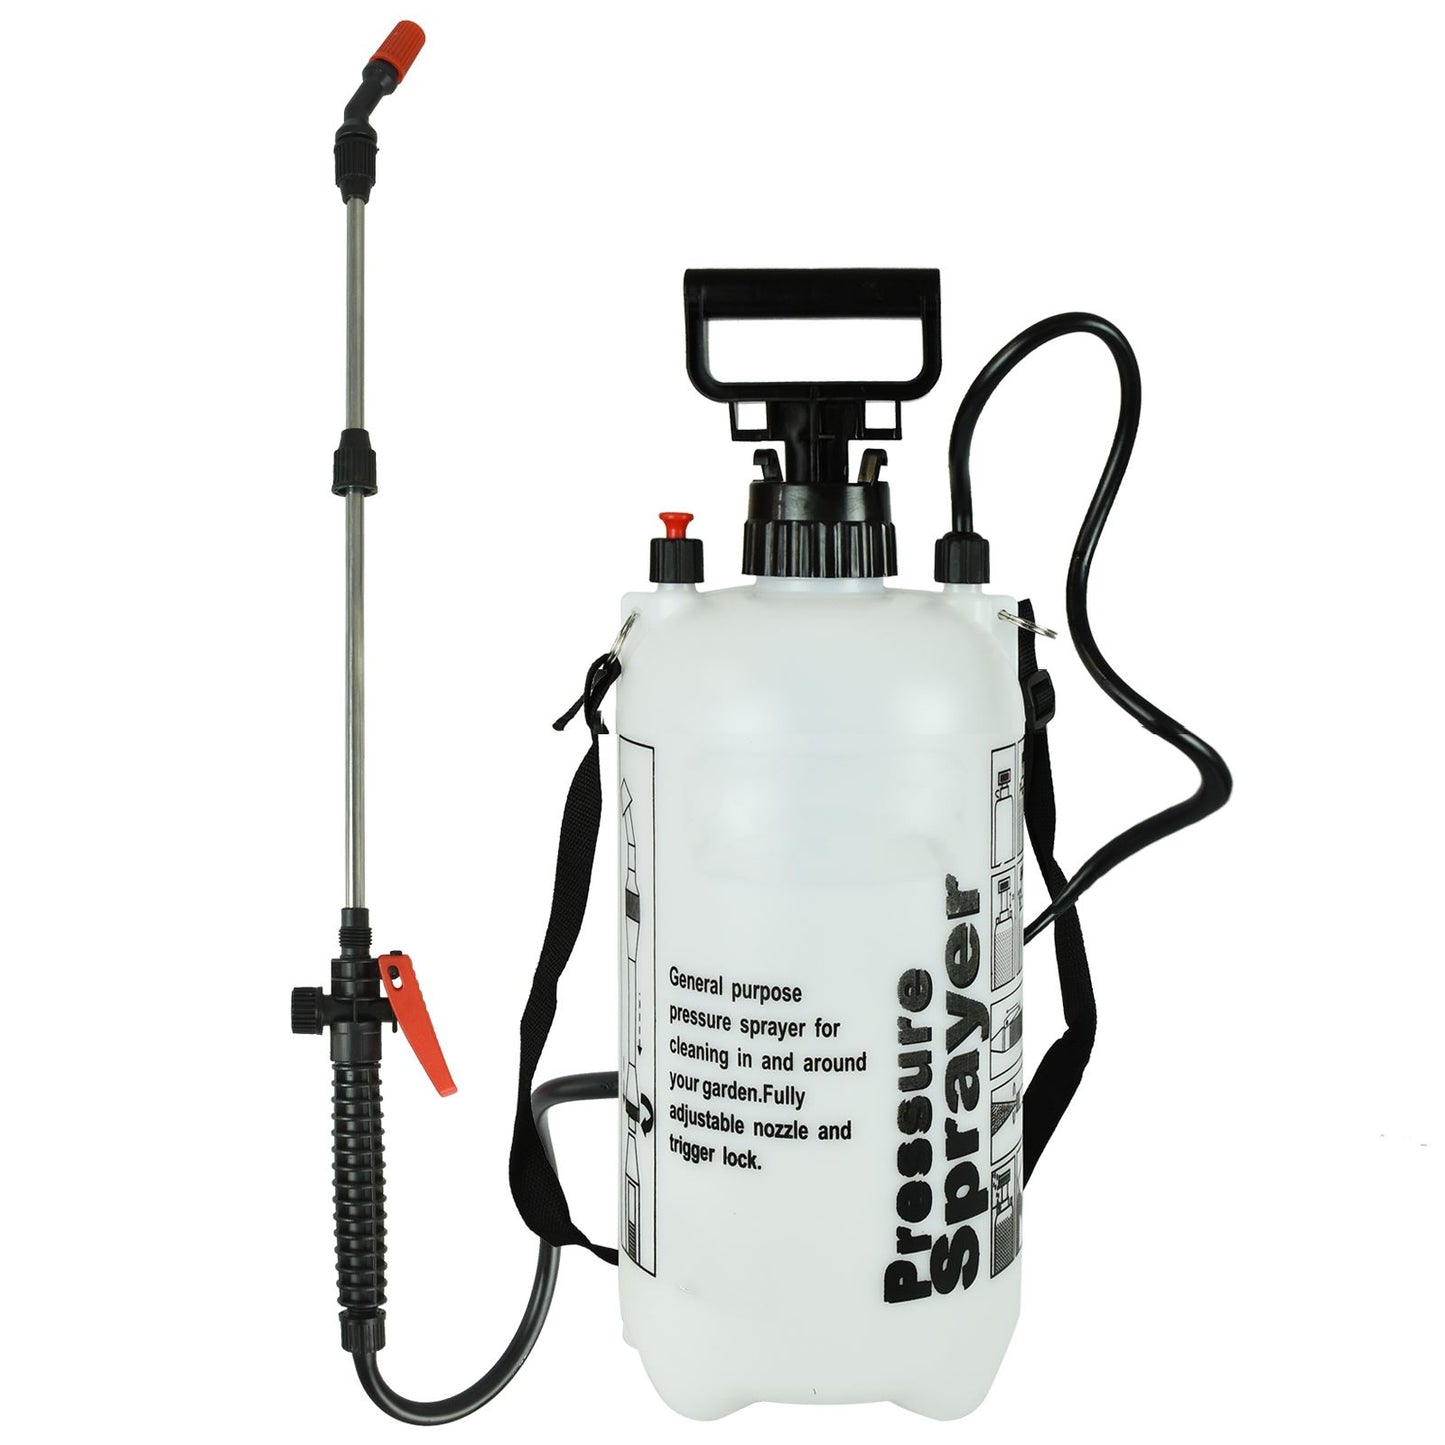 Easy-To-Use 5L Pressure Sprayer For Your Garden